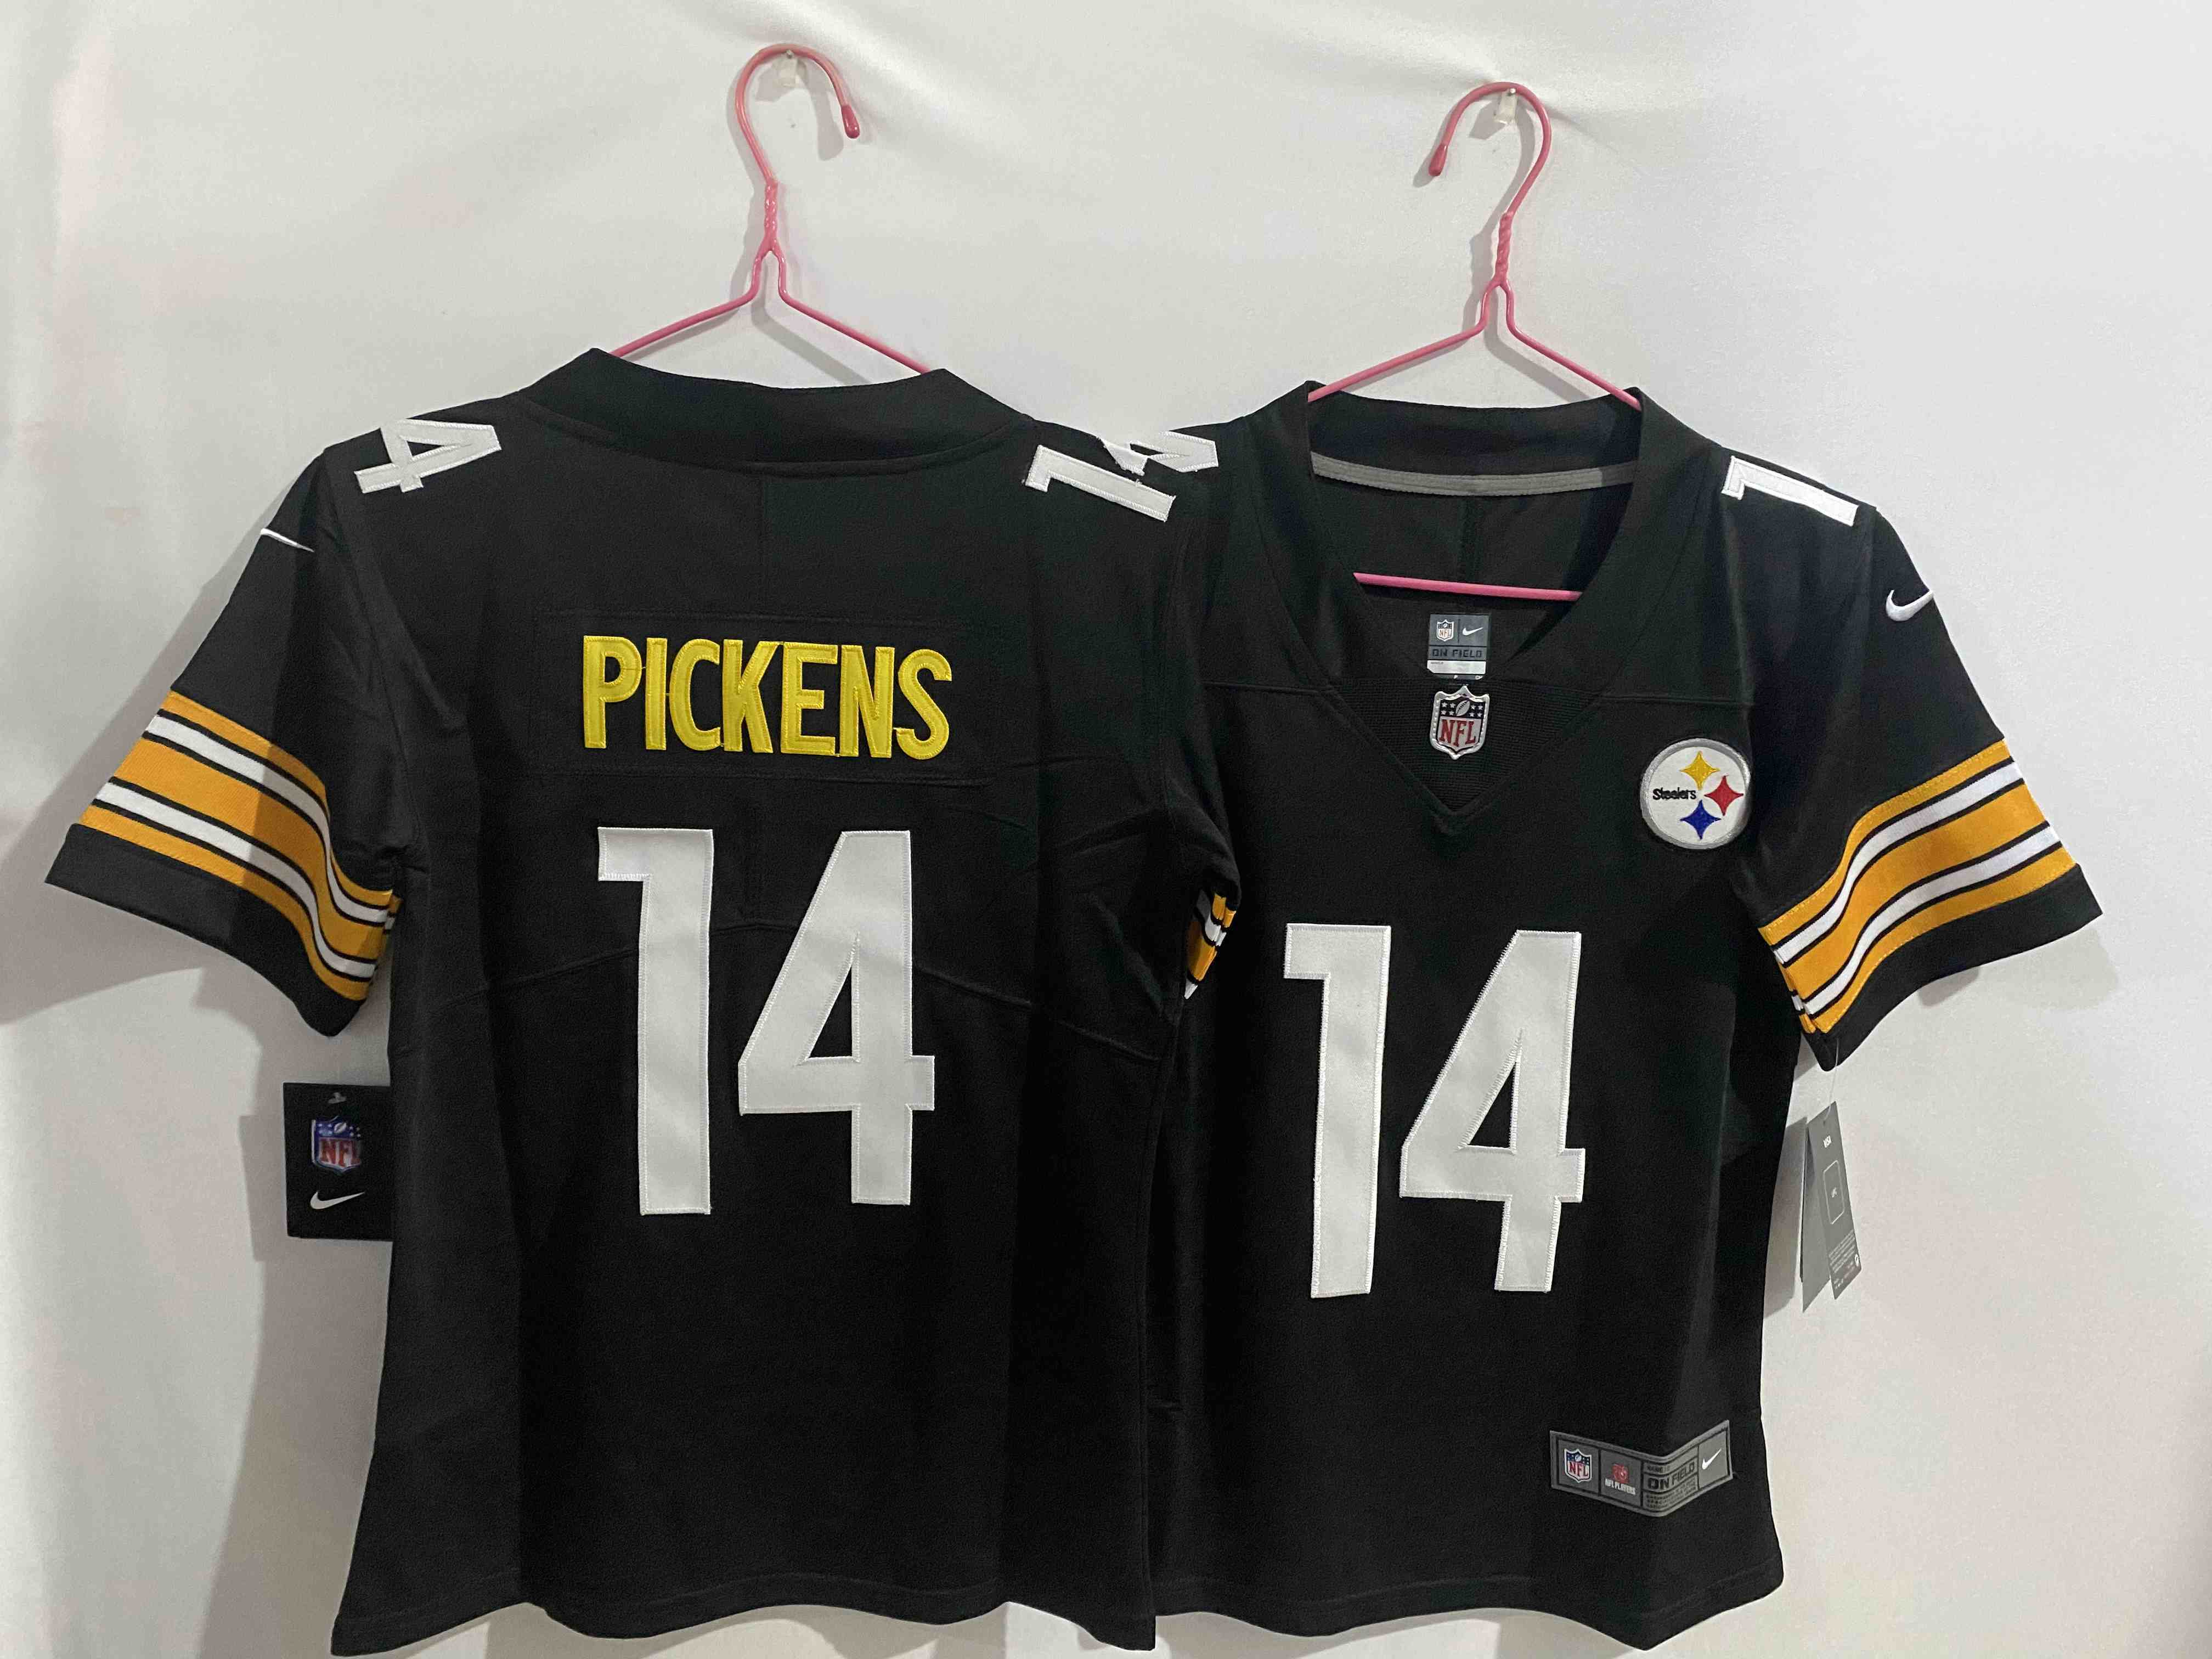 Youth Pittsburgh Steelers #14 George Pickens Black Vapor Limited Jersey